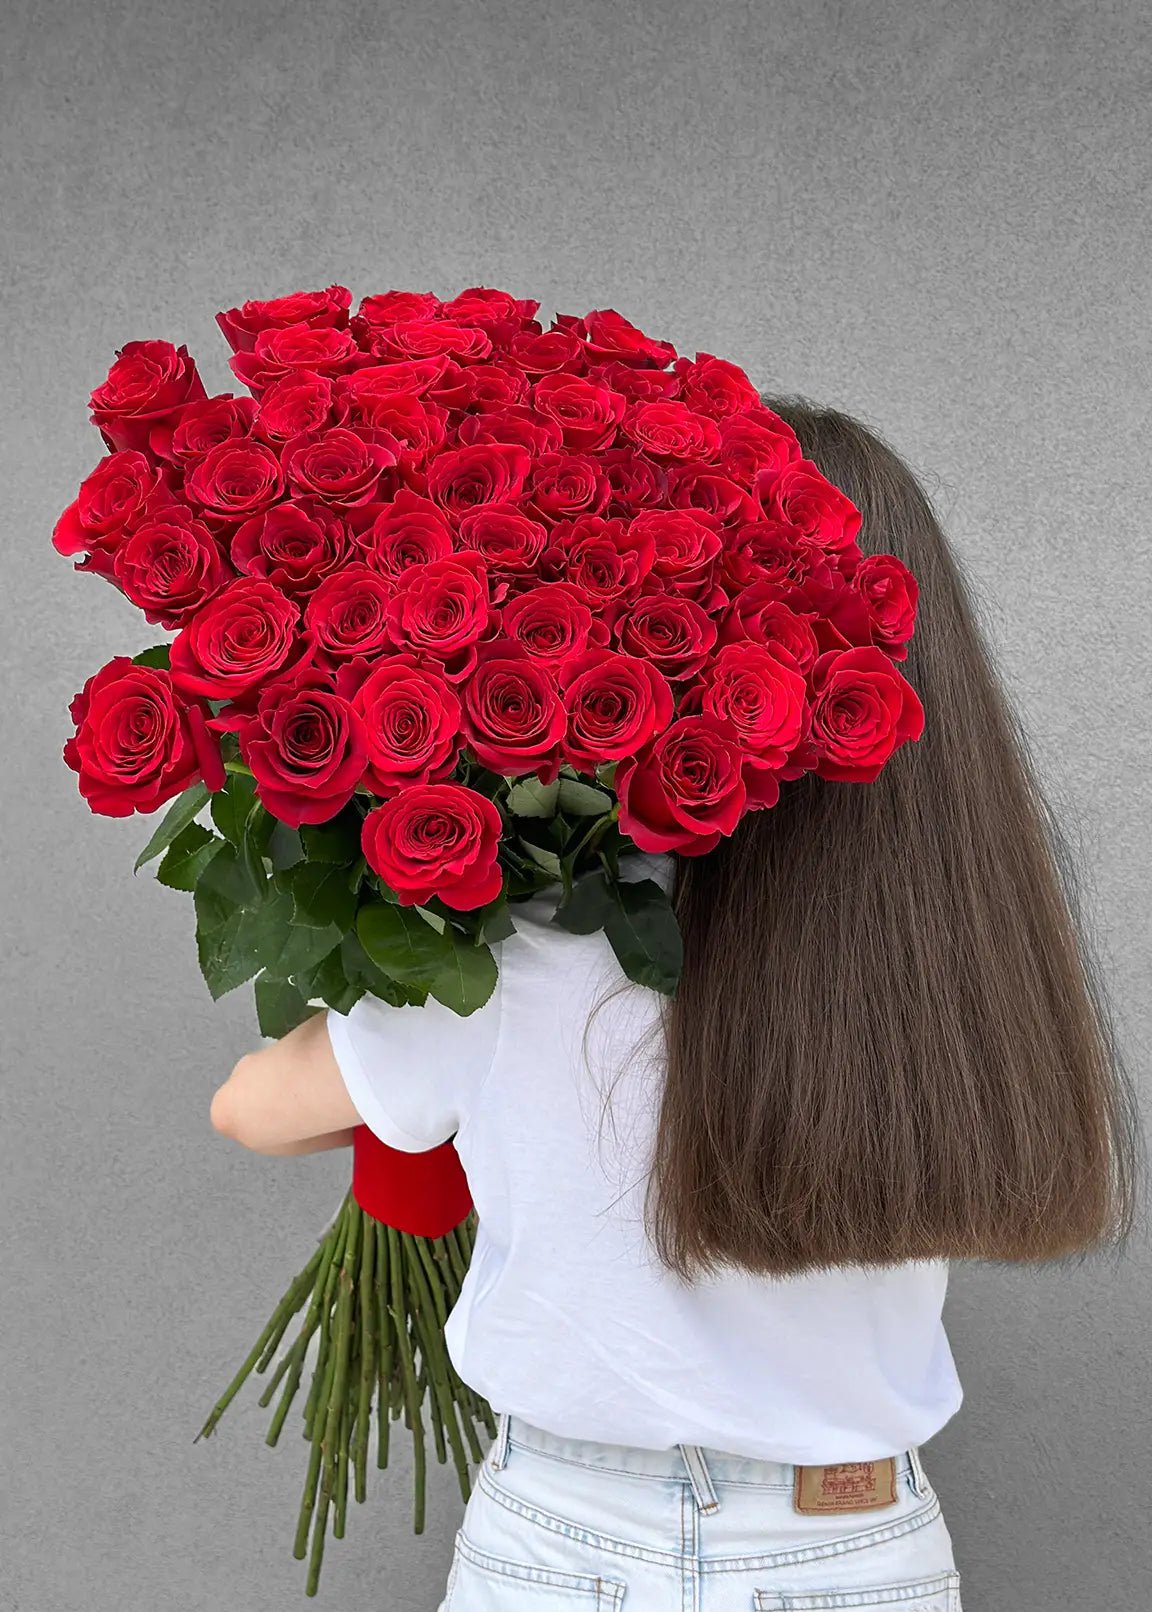 NO. 28. Super Long Stems Red Roses